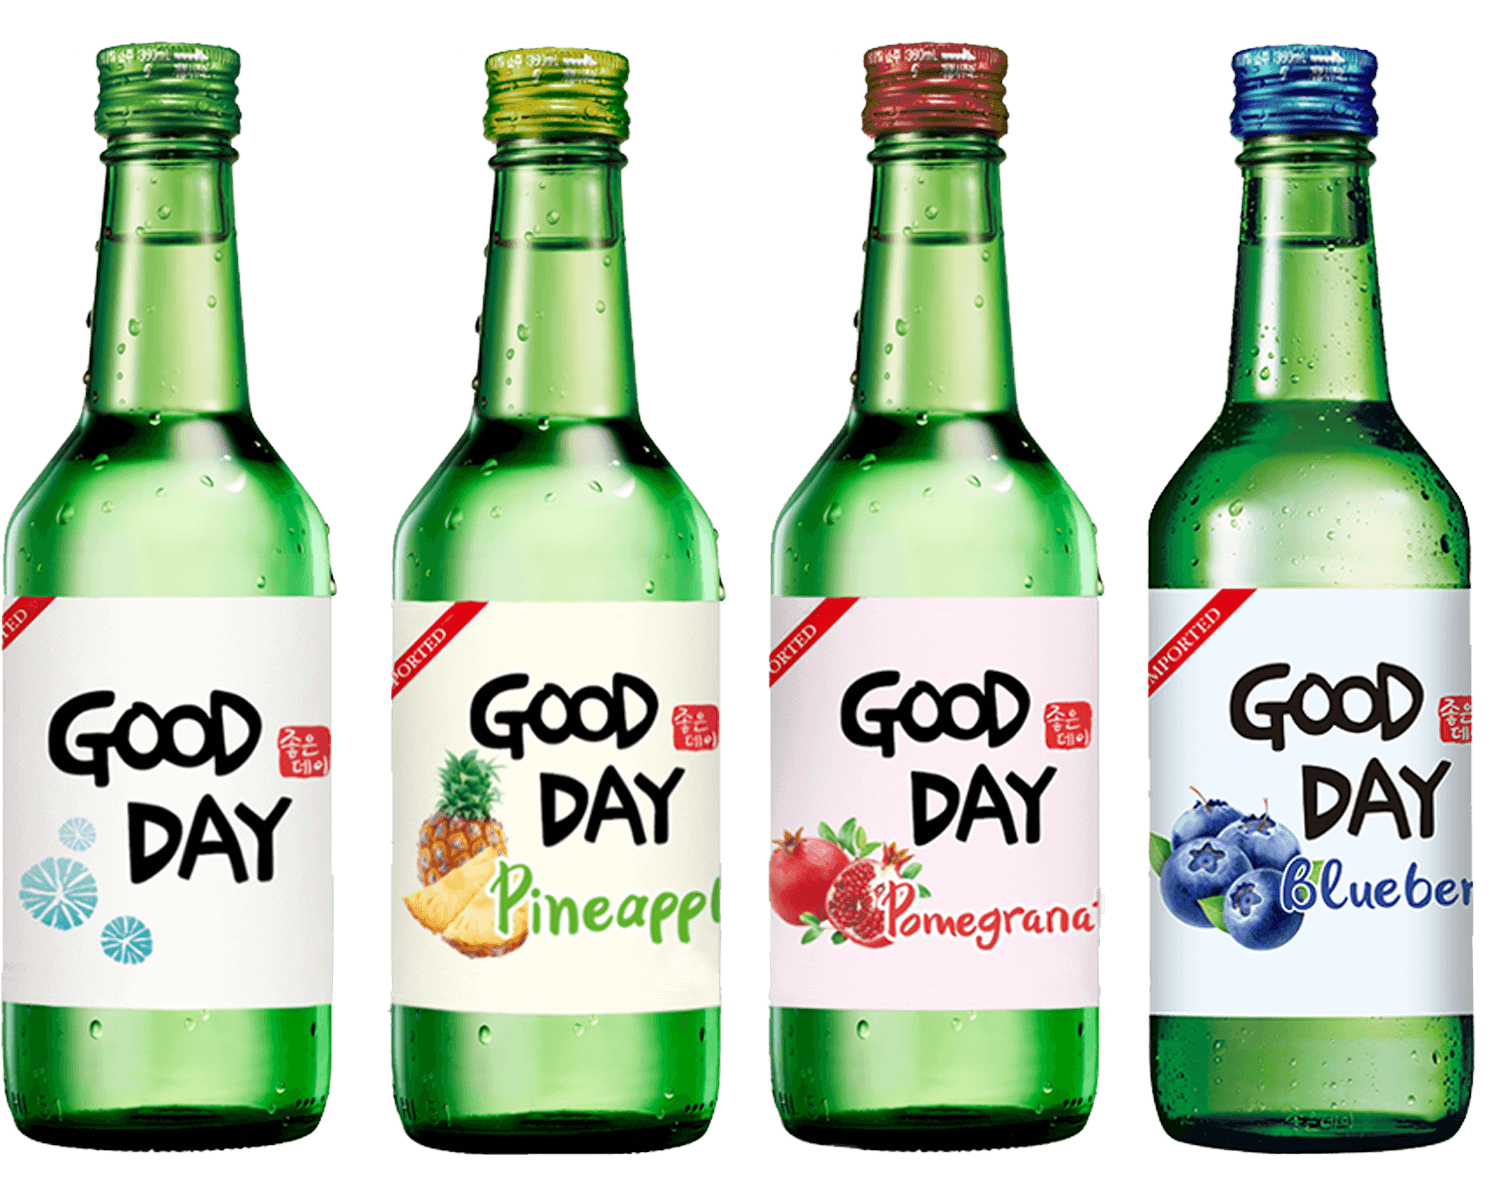 Good Day Soju in Canada | The Moose Imports Corp